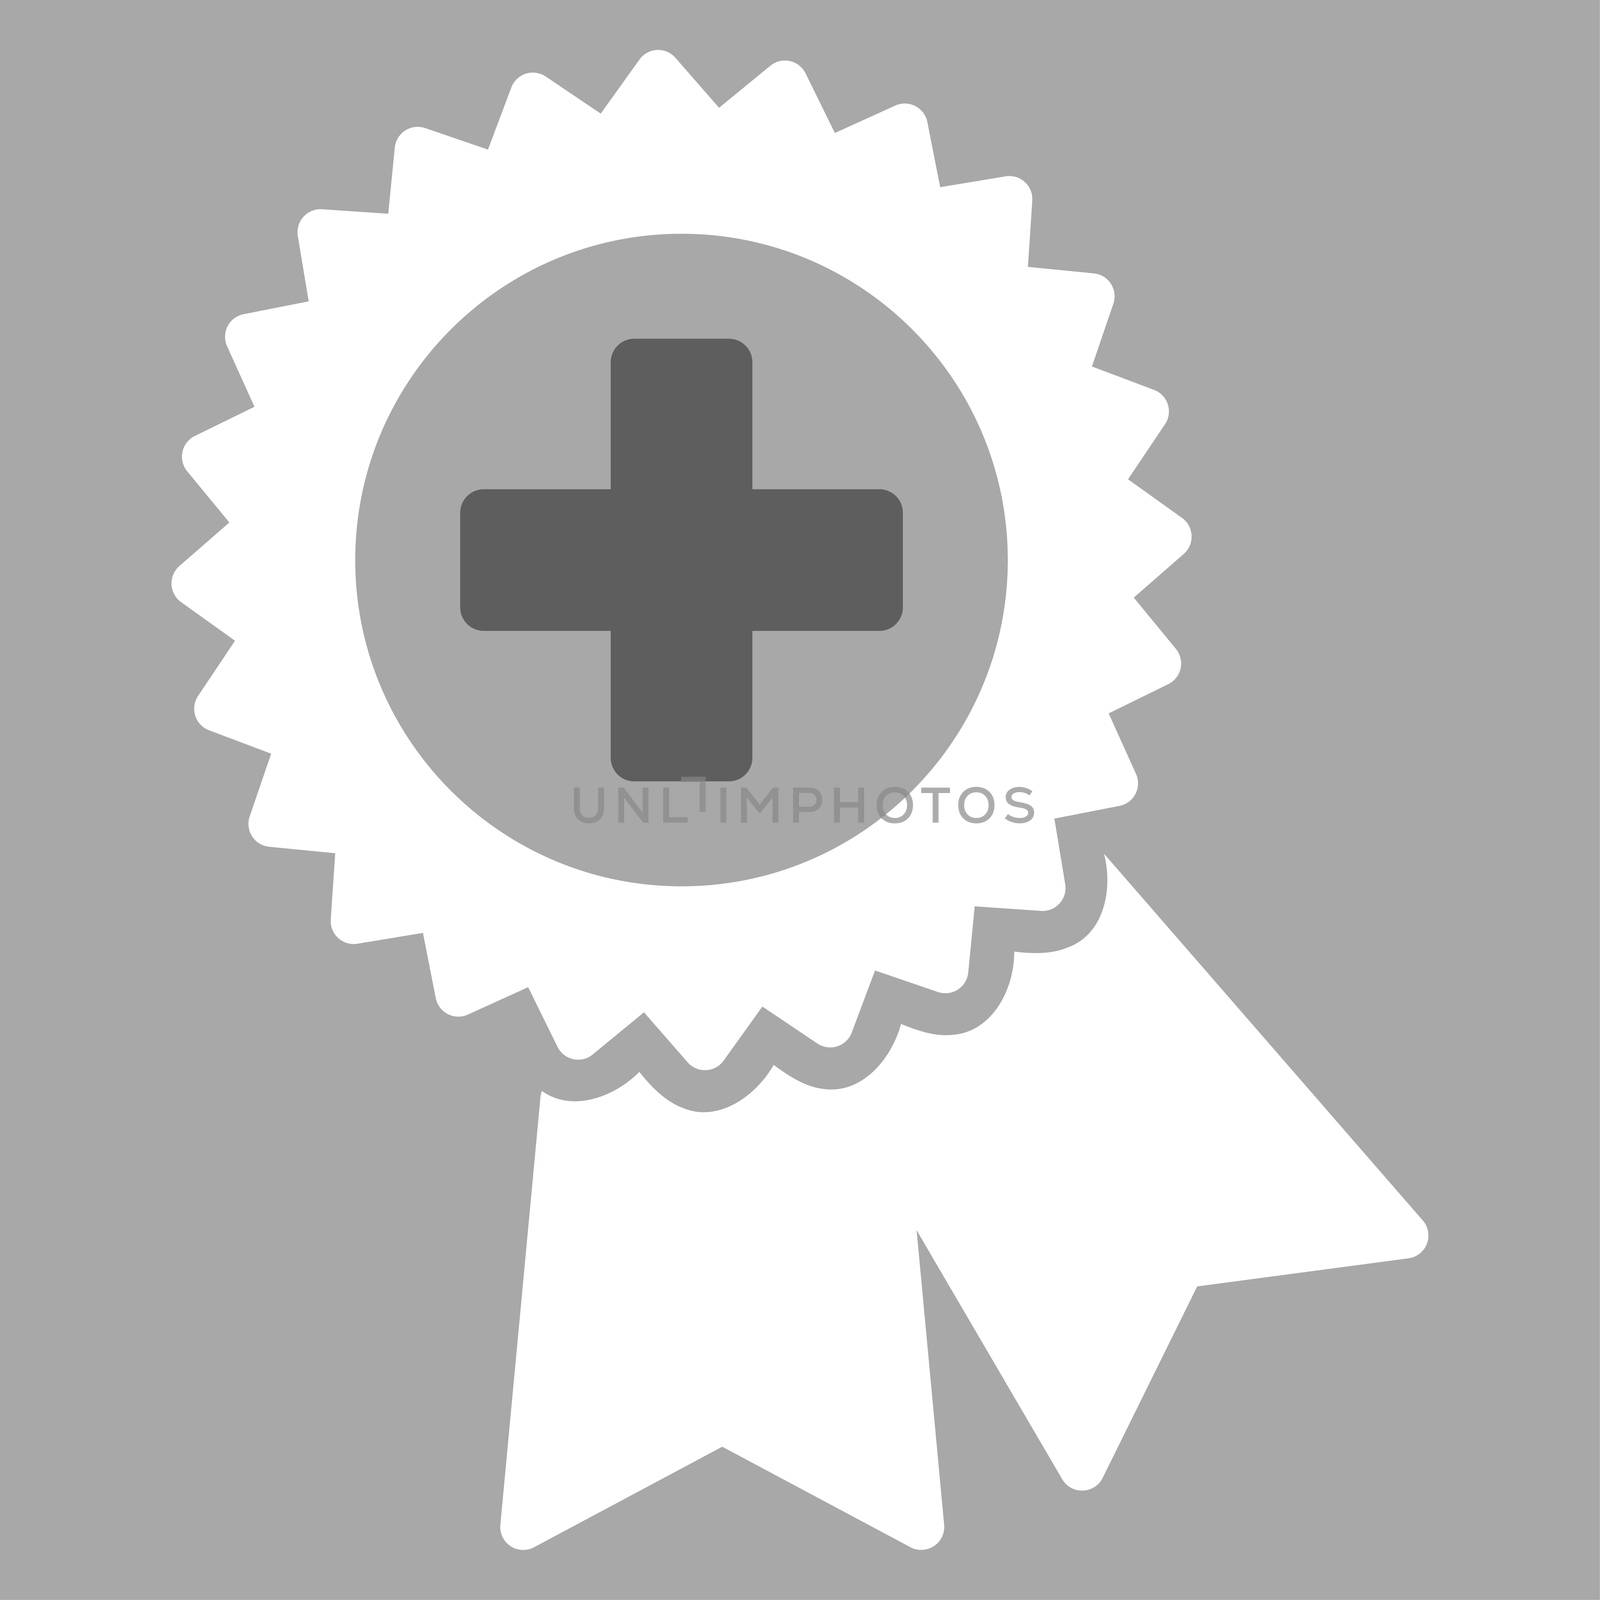 Medical Quality Seal raster icon. Style is bicolor flat symbol, dark gray and white colors, rounded angles, silver background.